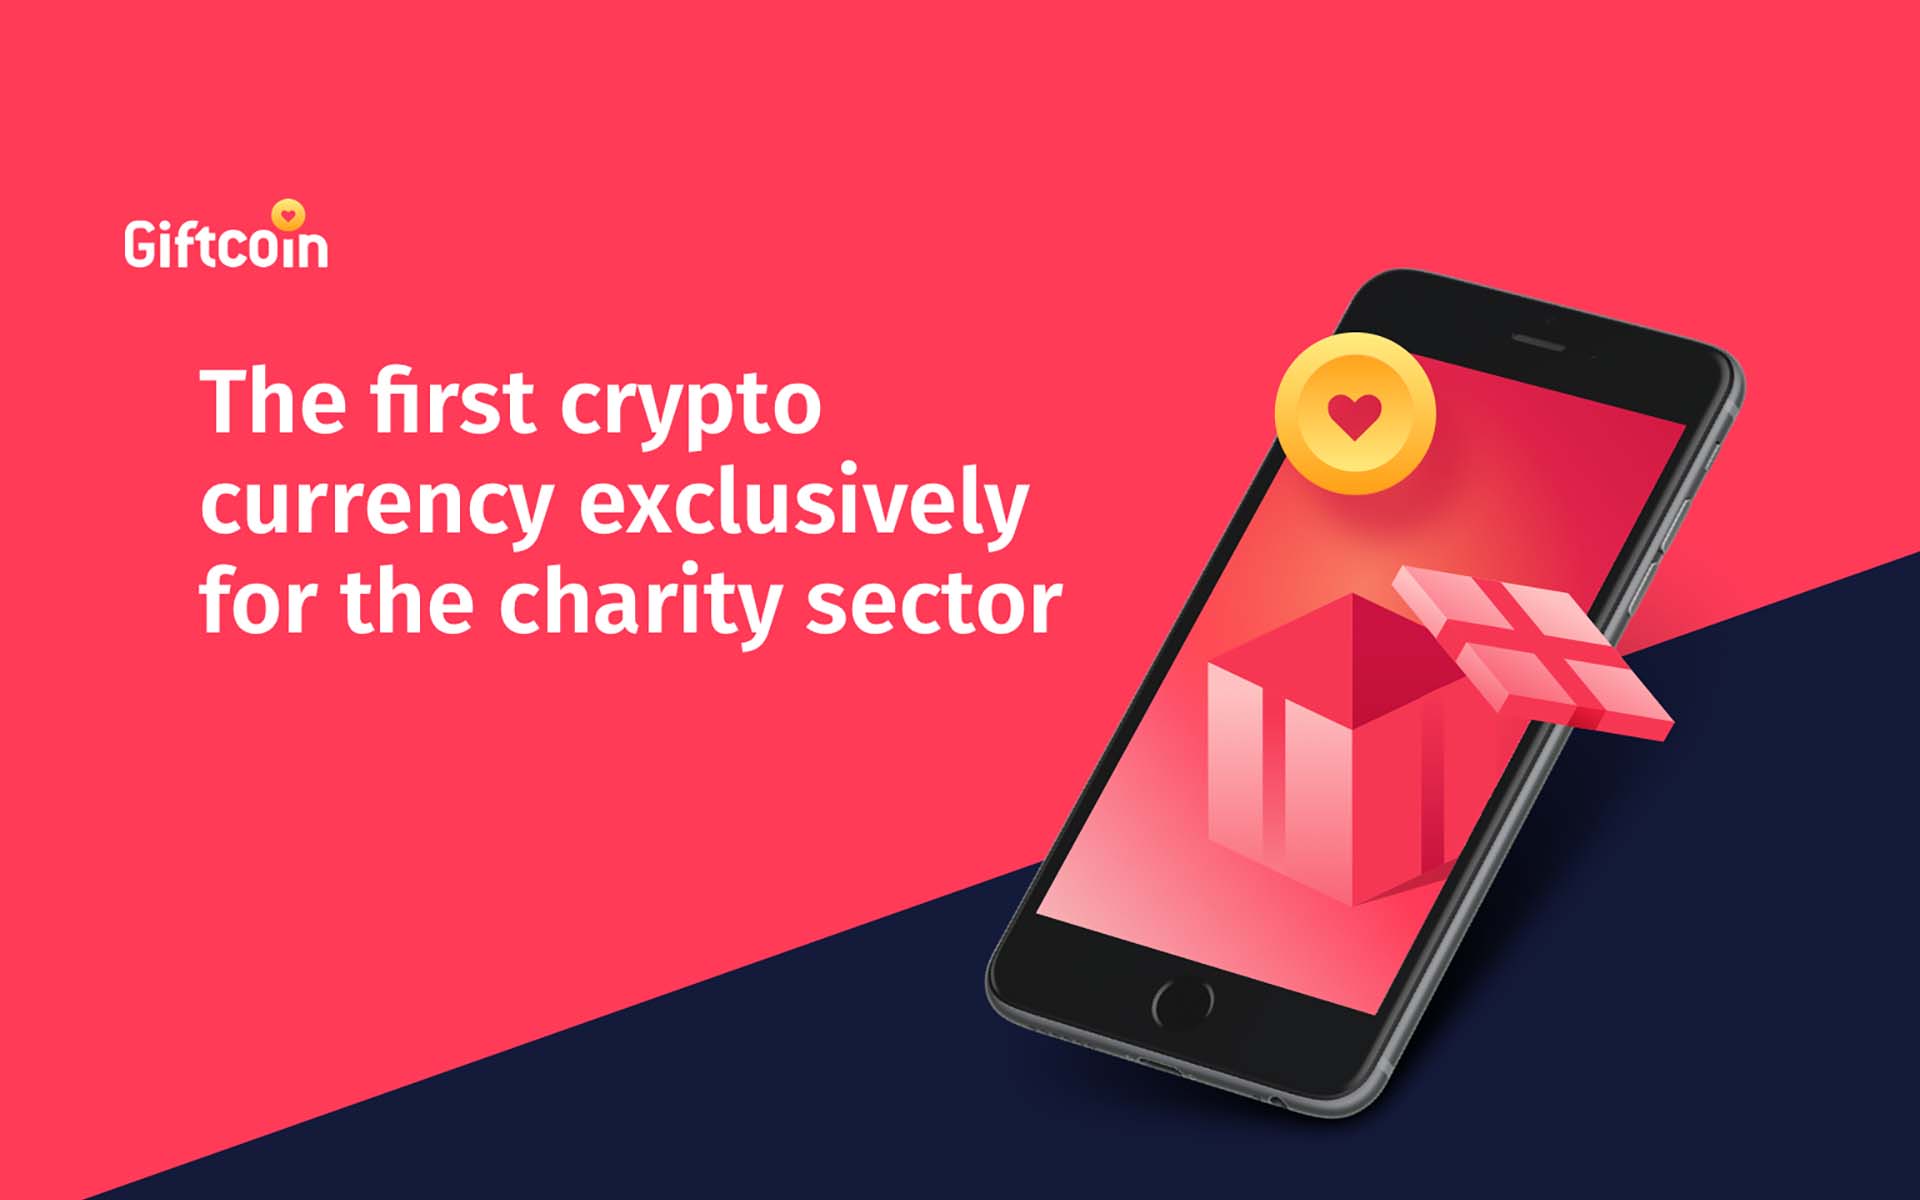 Giftcoin Brings Blockchain Technology to Charities for Greater Transparency